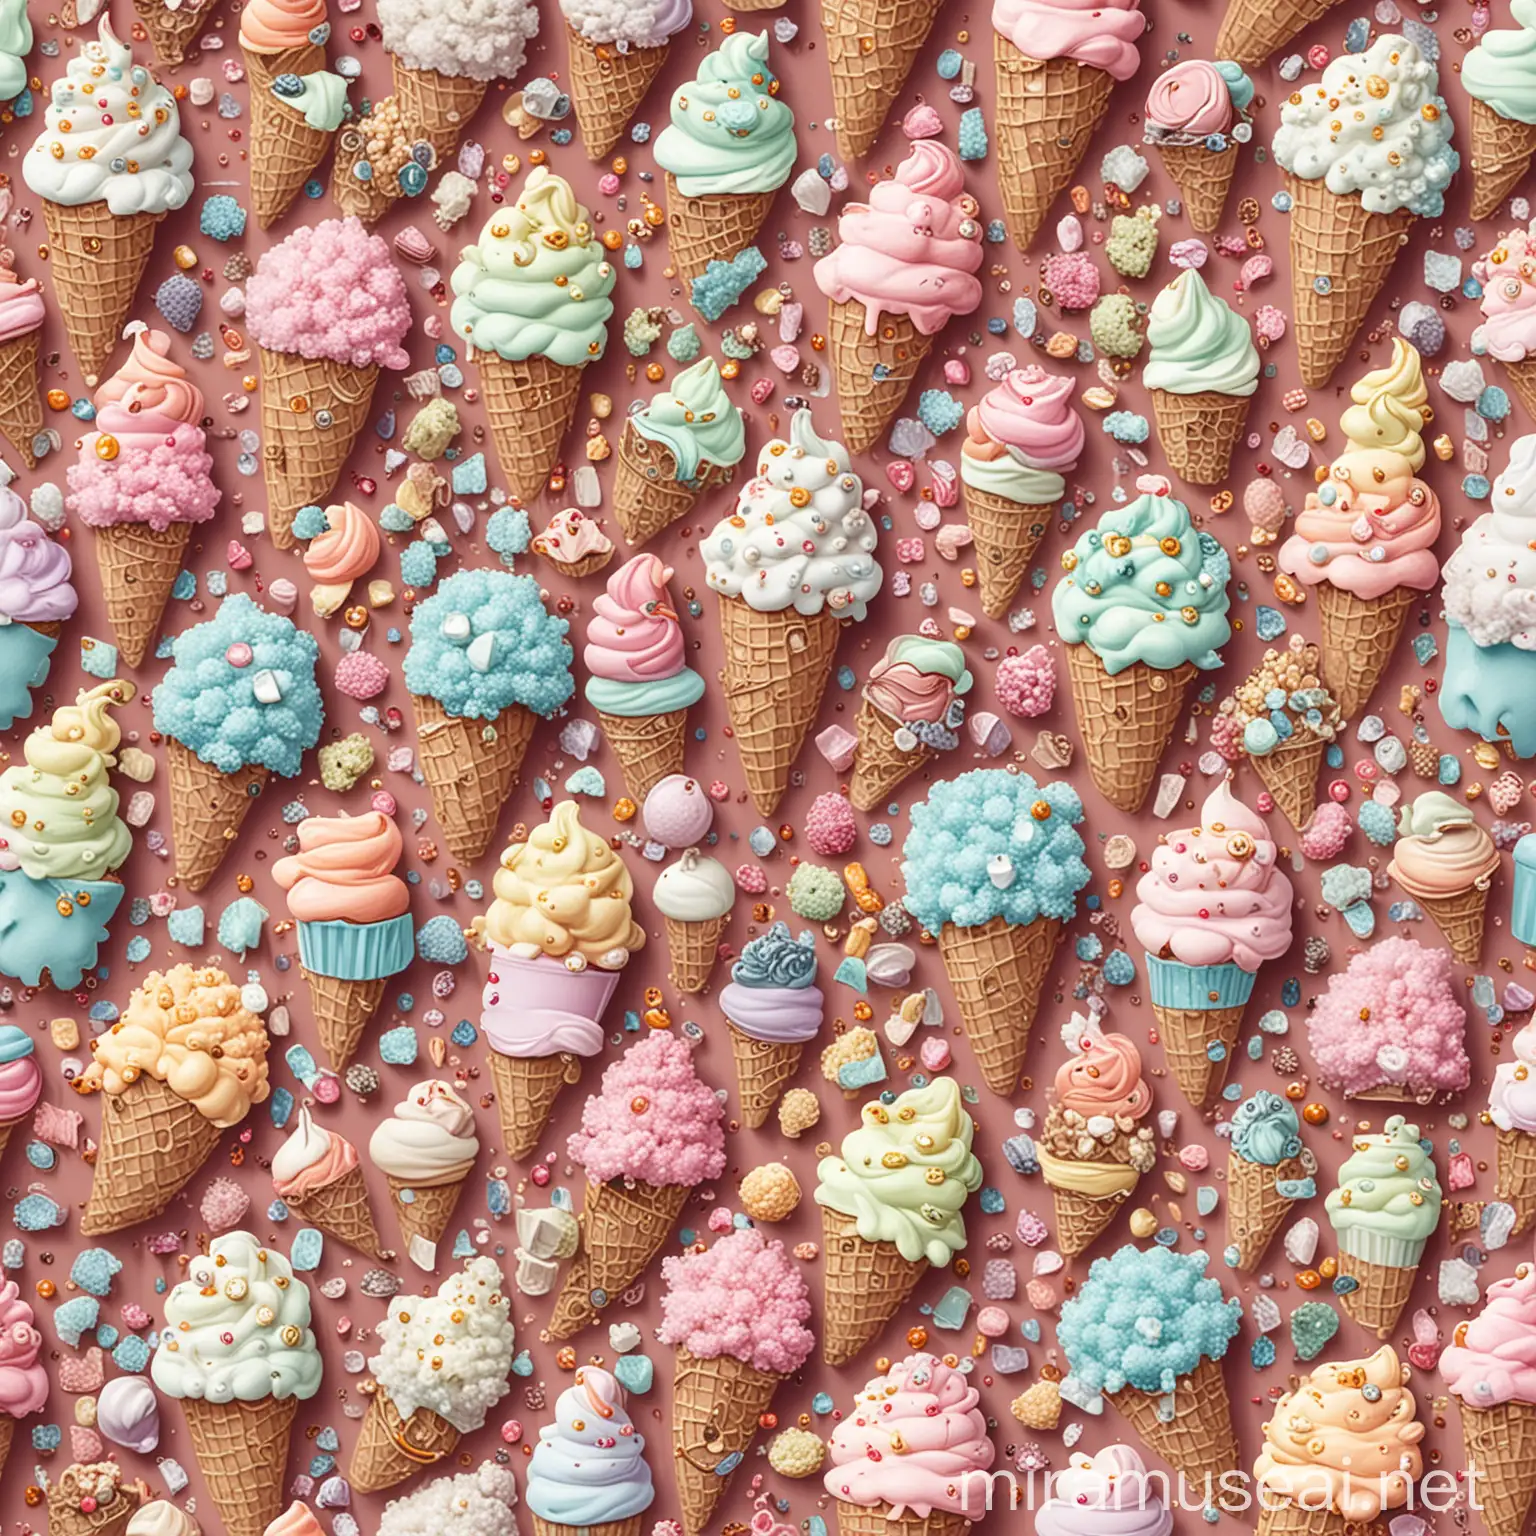 Create a seamless pattern featuring an elegant and whimsical mix of engagement rings, ice cream, and popcorn. Include beautifully detailed engagement rings with sparkling diamonds set in intricate designs, paired with stylized ice cream cones with swirls of creamy gelato topped with colorful sprinkles, and cozy, fluffy popcorn clusters. Opt for a sophisticated yet playful illustration style, blending luxury and fun. Use a color palette that combines soft pastels with bright accents to highlight the engagement rings. The design should repeat seamlessly, making it ideal for bridal shower decorations, unique wedding invitations, or quirky textile designs.